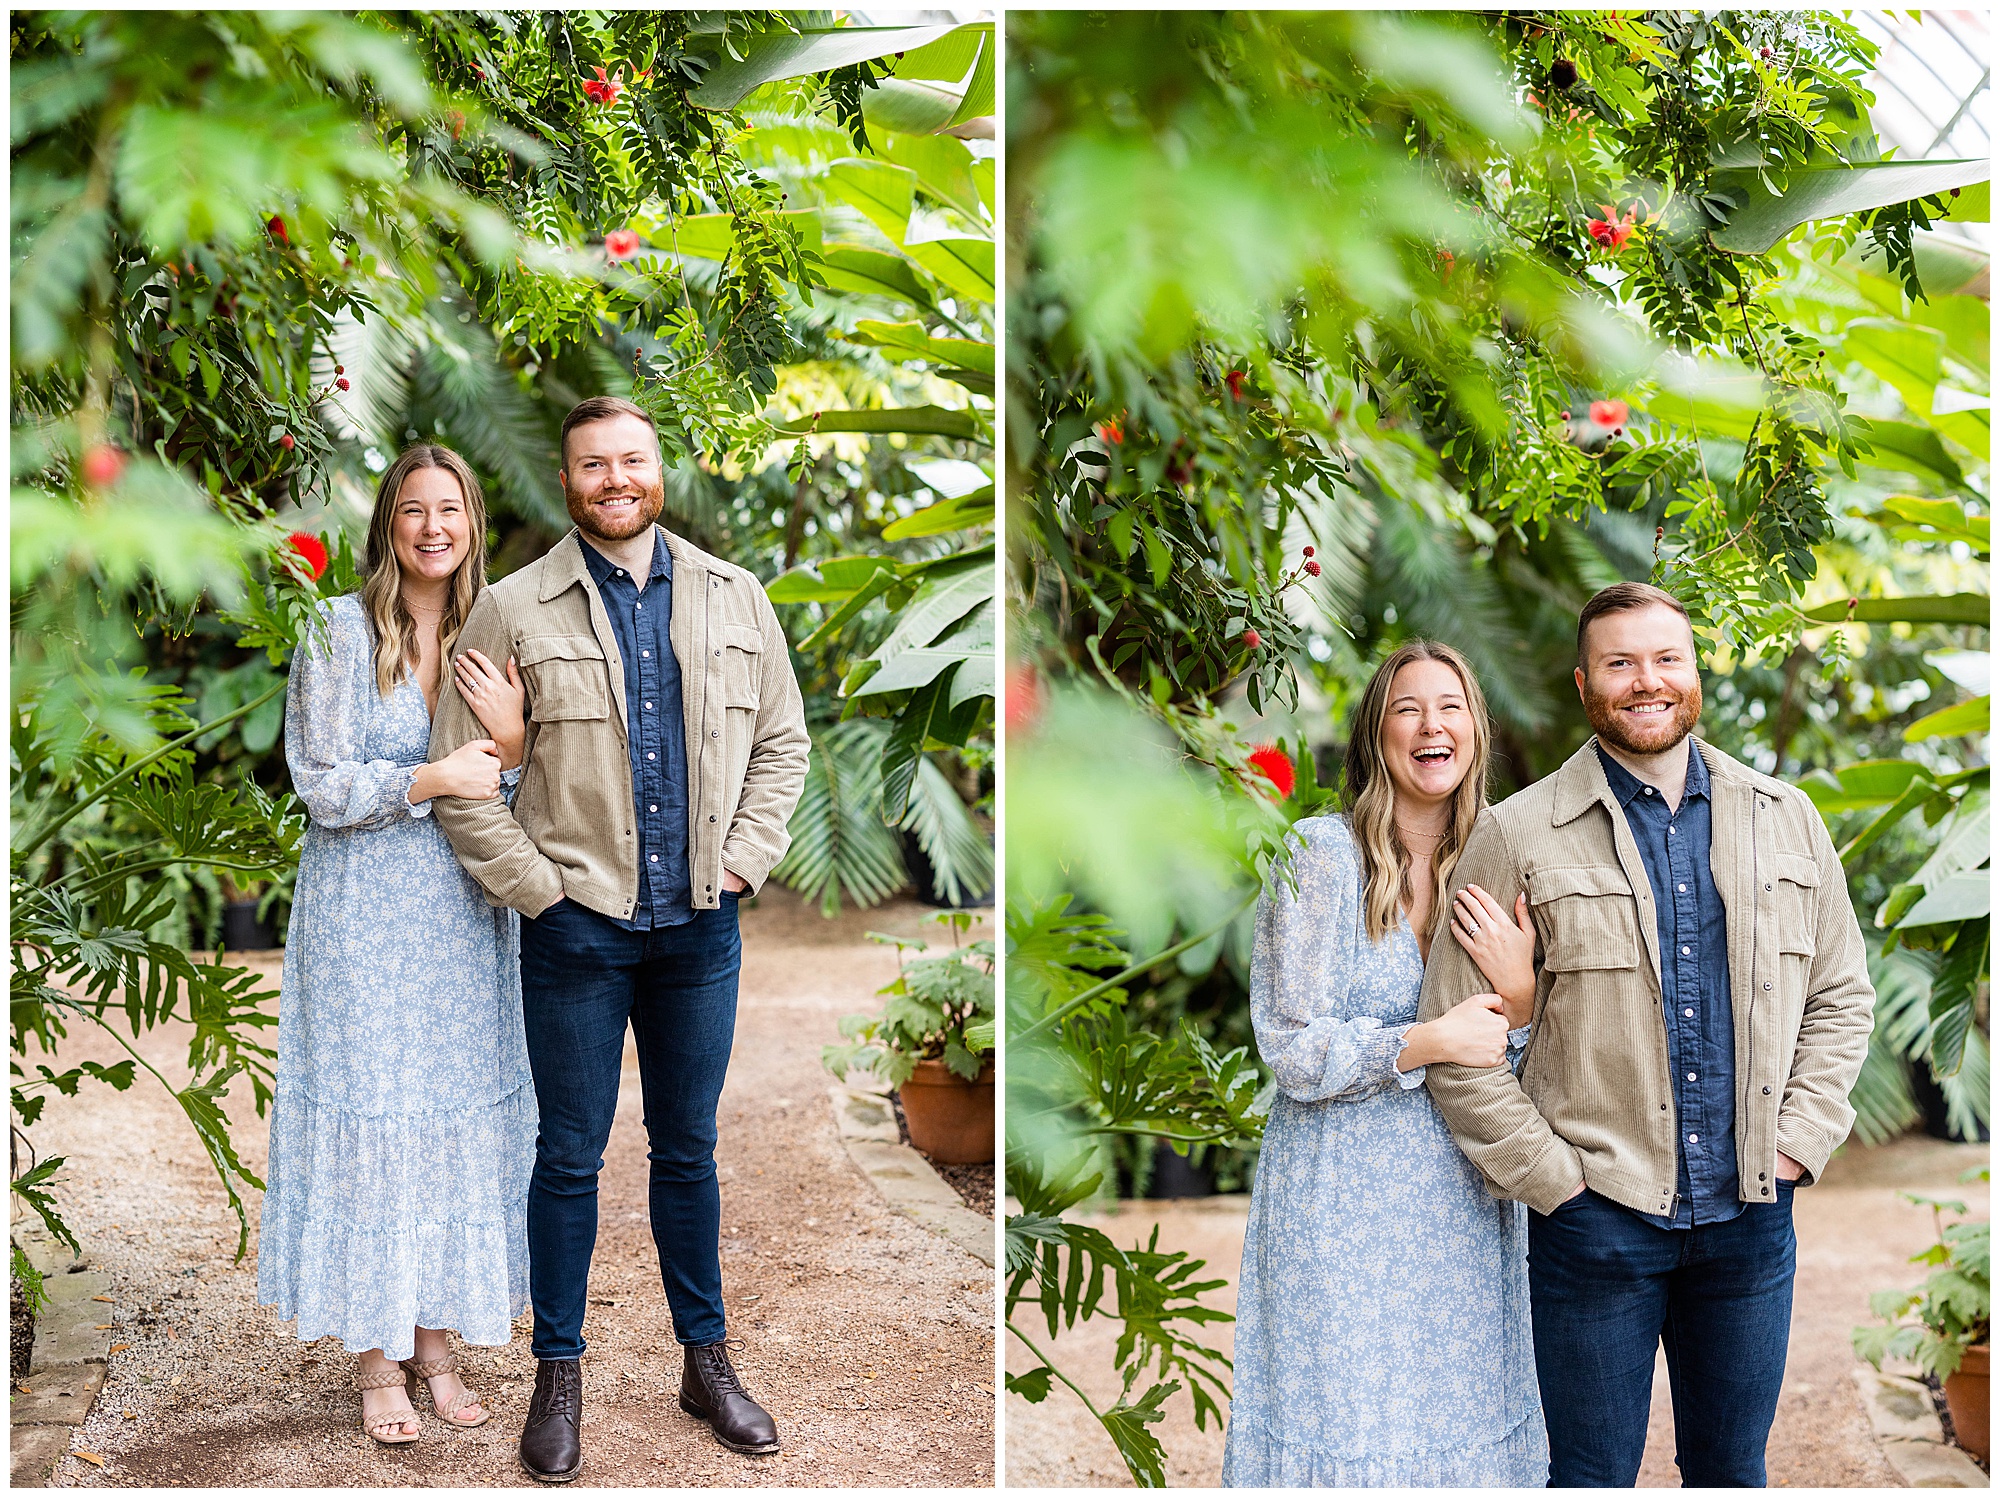 Eleanor Stenner Photography - a Birmingham, AL wedding photographer - photographs the Whitenecks in her Valentine's Day Mini Sessions